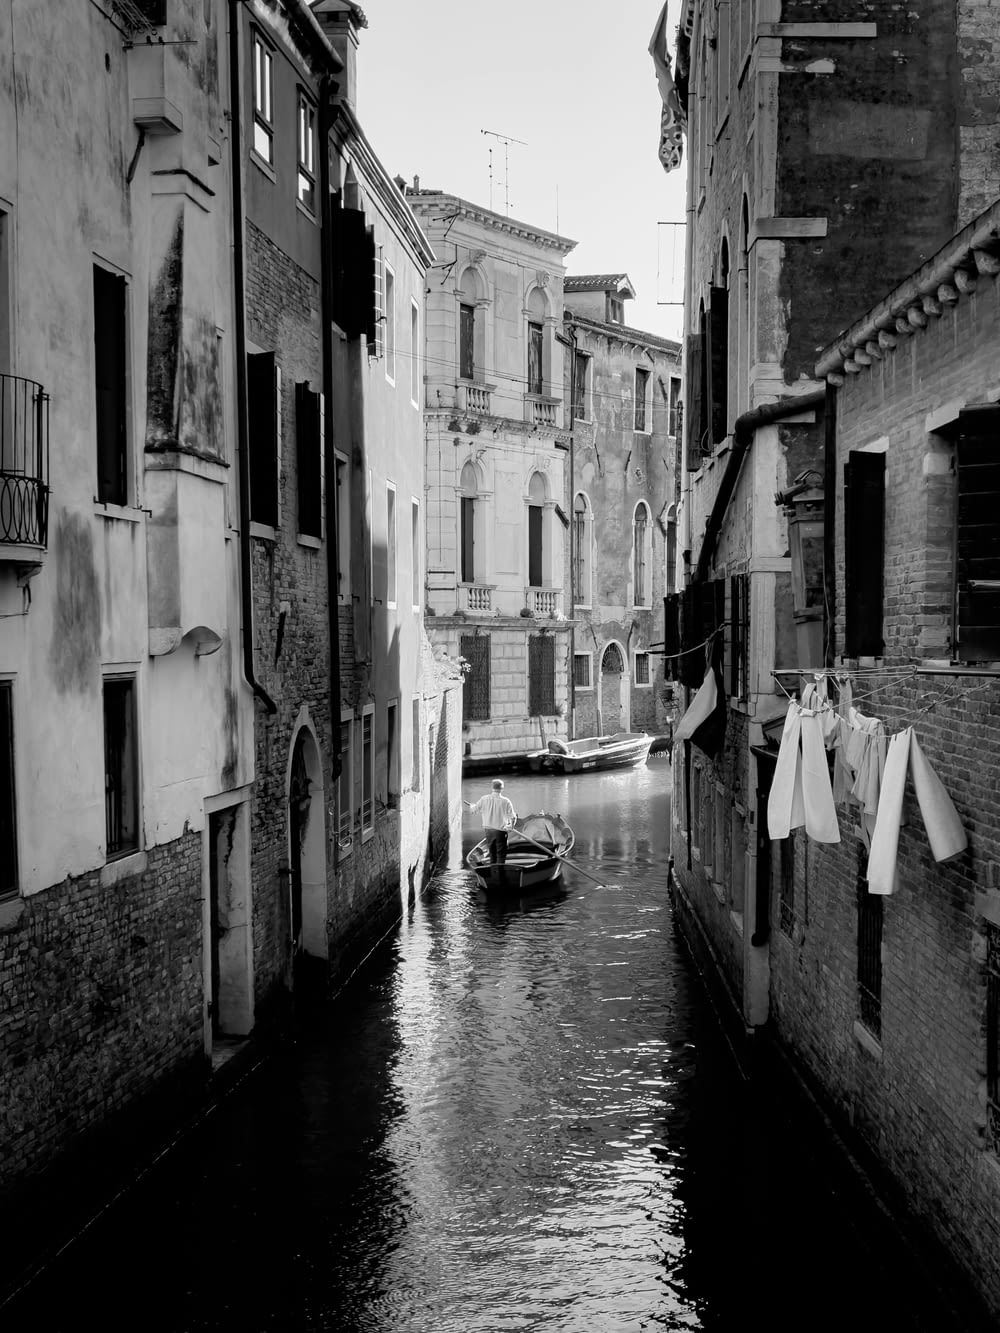 a black and white photo of a canal in a city